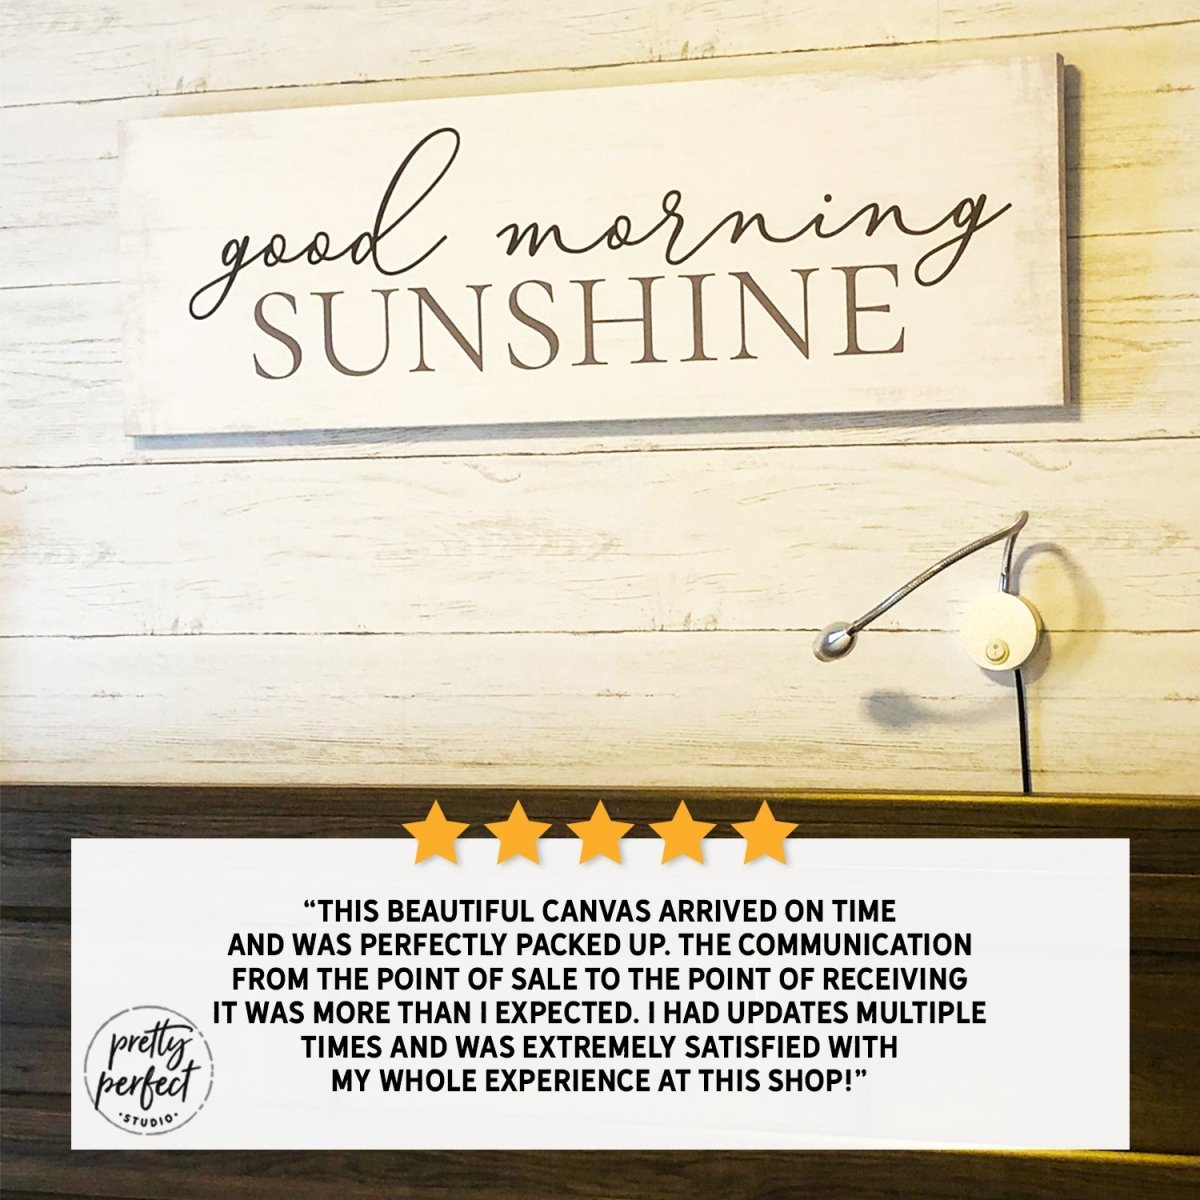 Customer product review for good morning sunshine sign by Pretty Perfect Studio